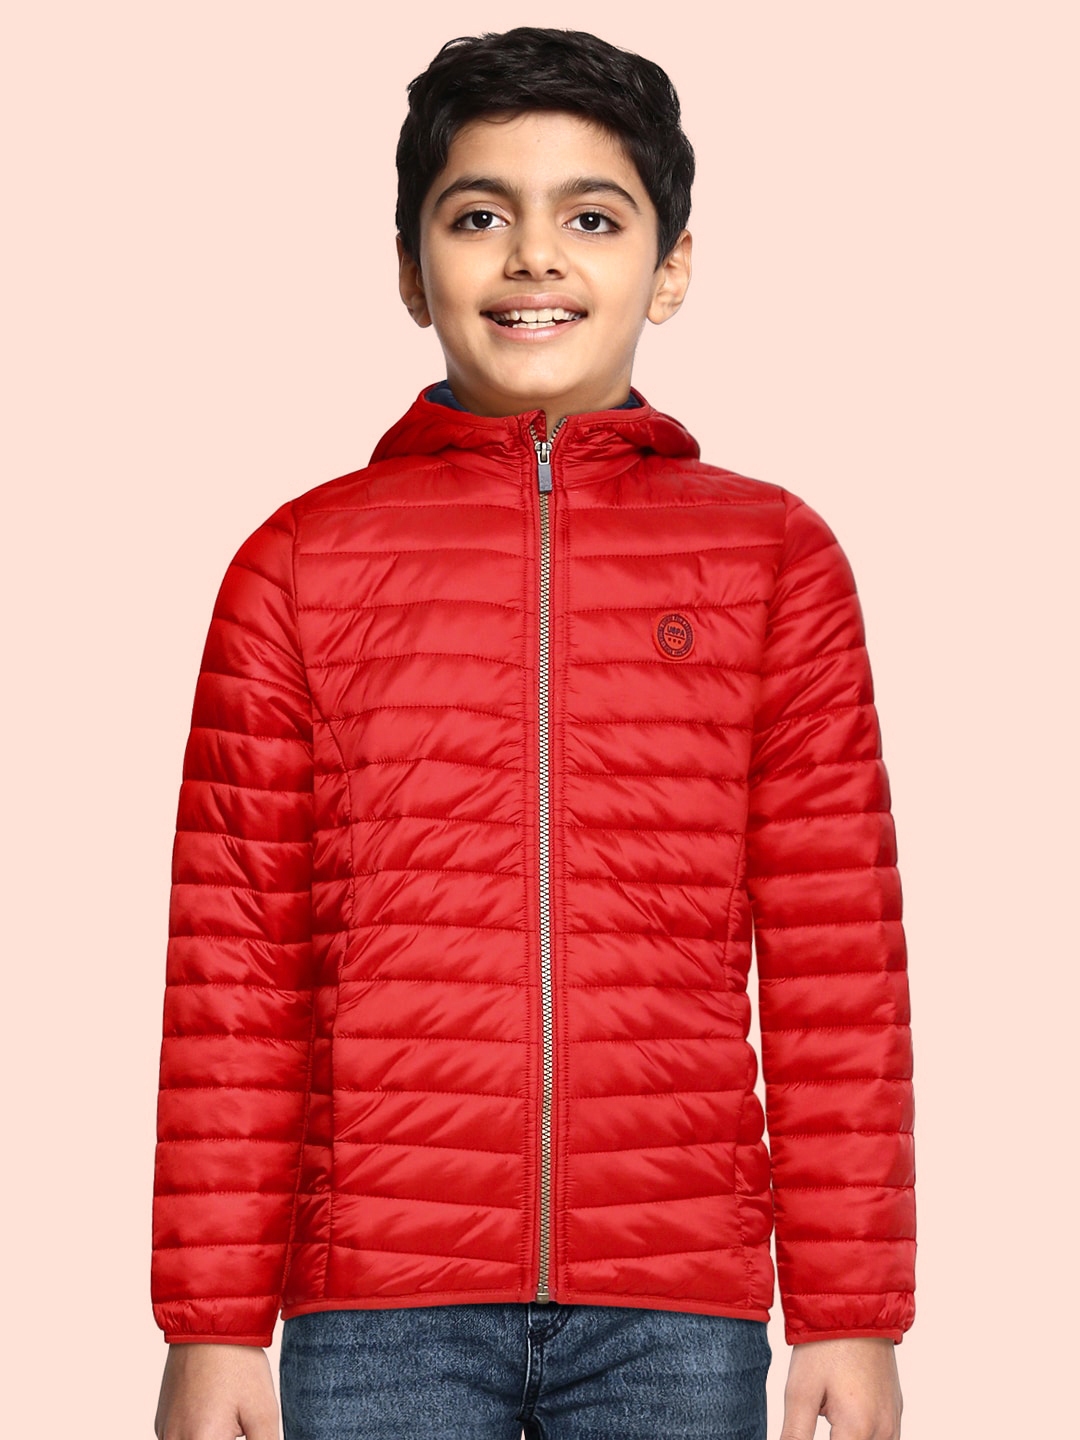 Buy U.S. Polo Assn. Kids Boys Red Solid Puffer Jacket - Jackets for ...